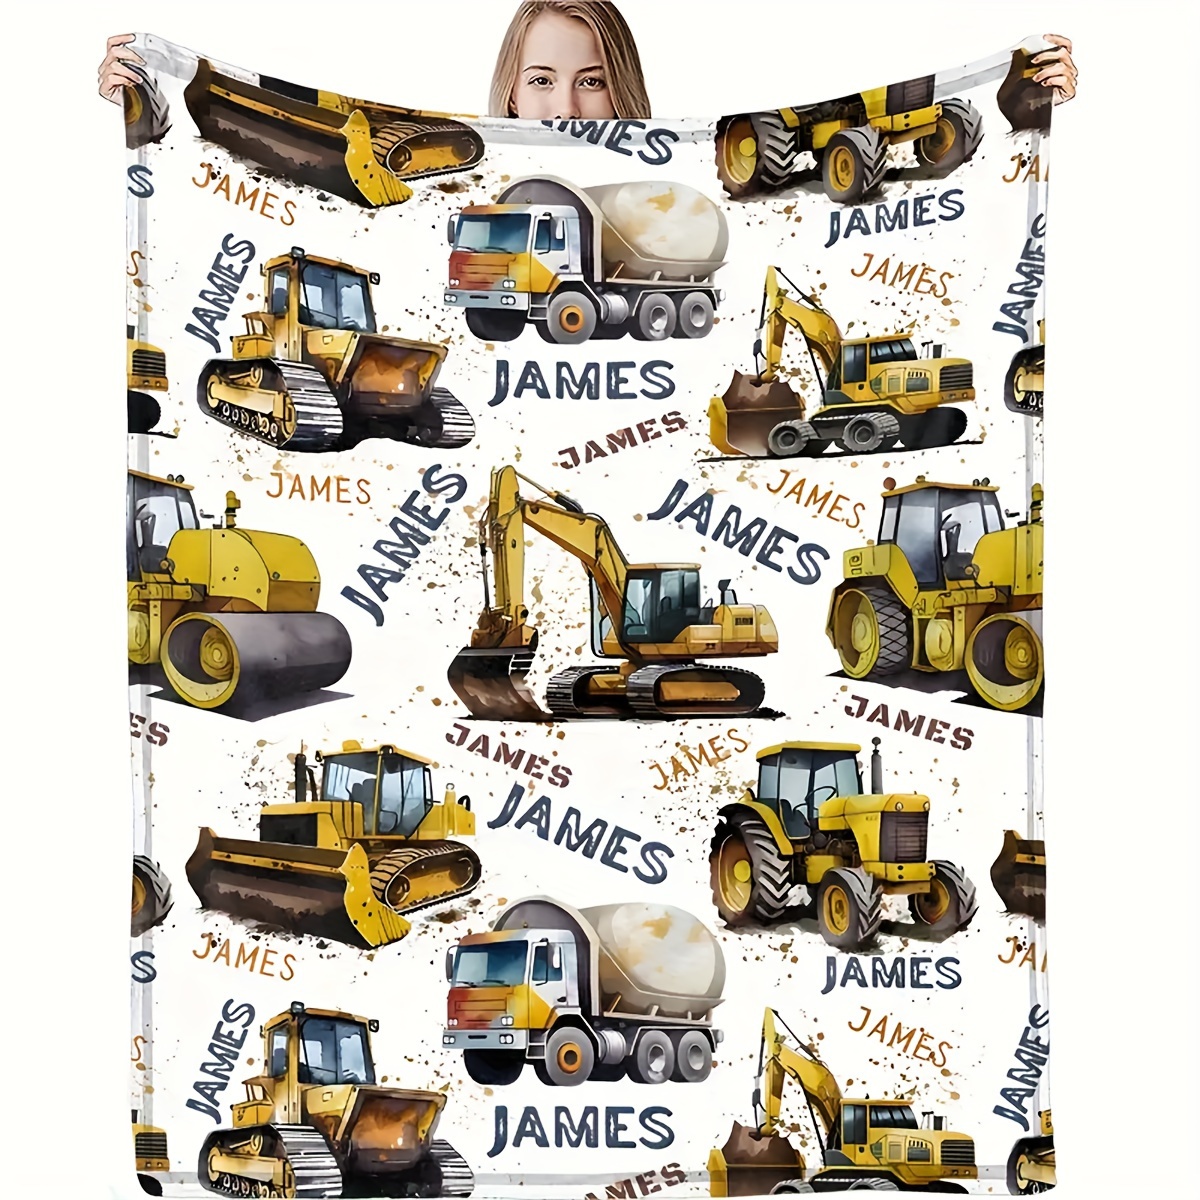 

Custom Name Blanket With Small Tractor Design - Soft & Warm Flannel, Perfect For Sofa, Bed, Travel, Camping, Living Room, Office Chair - Machine Washable